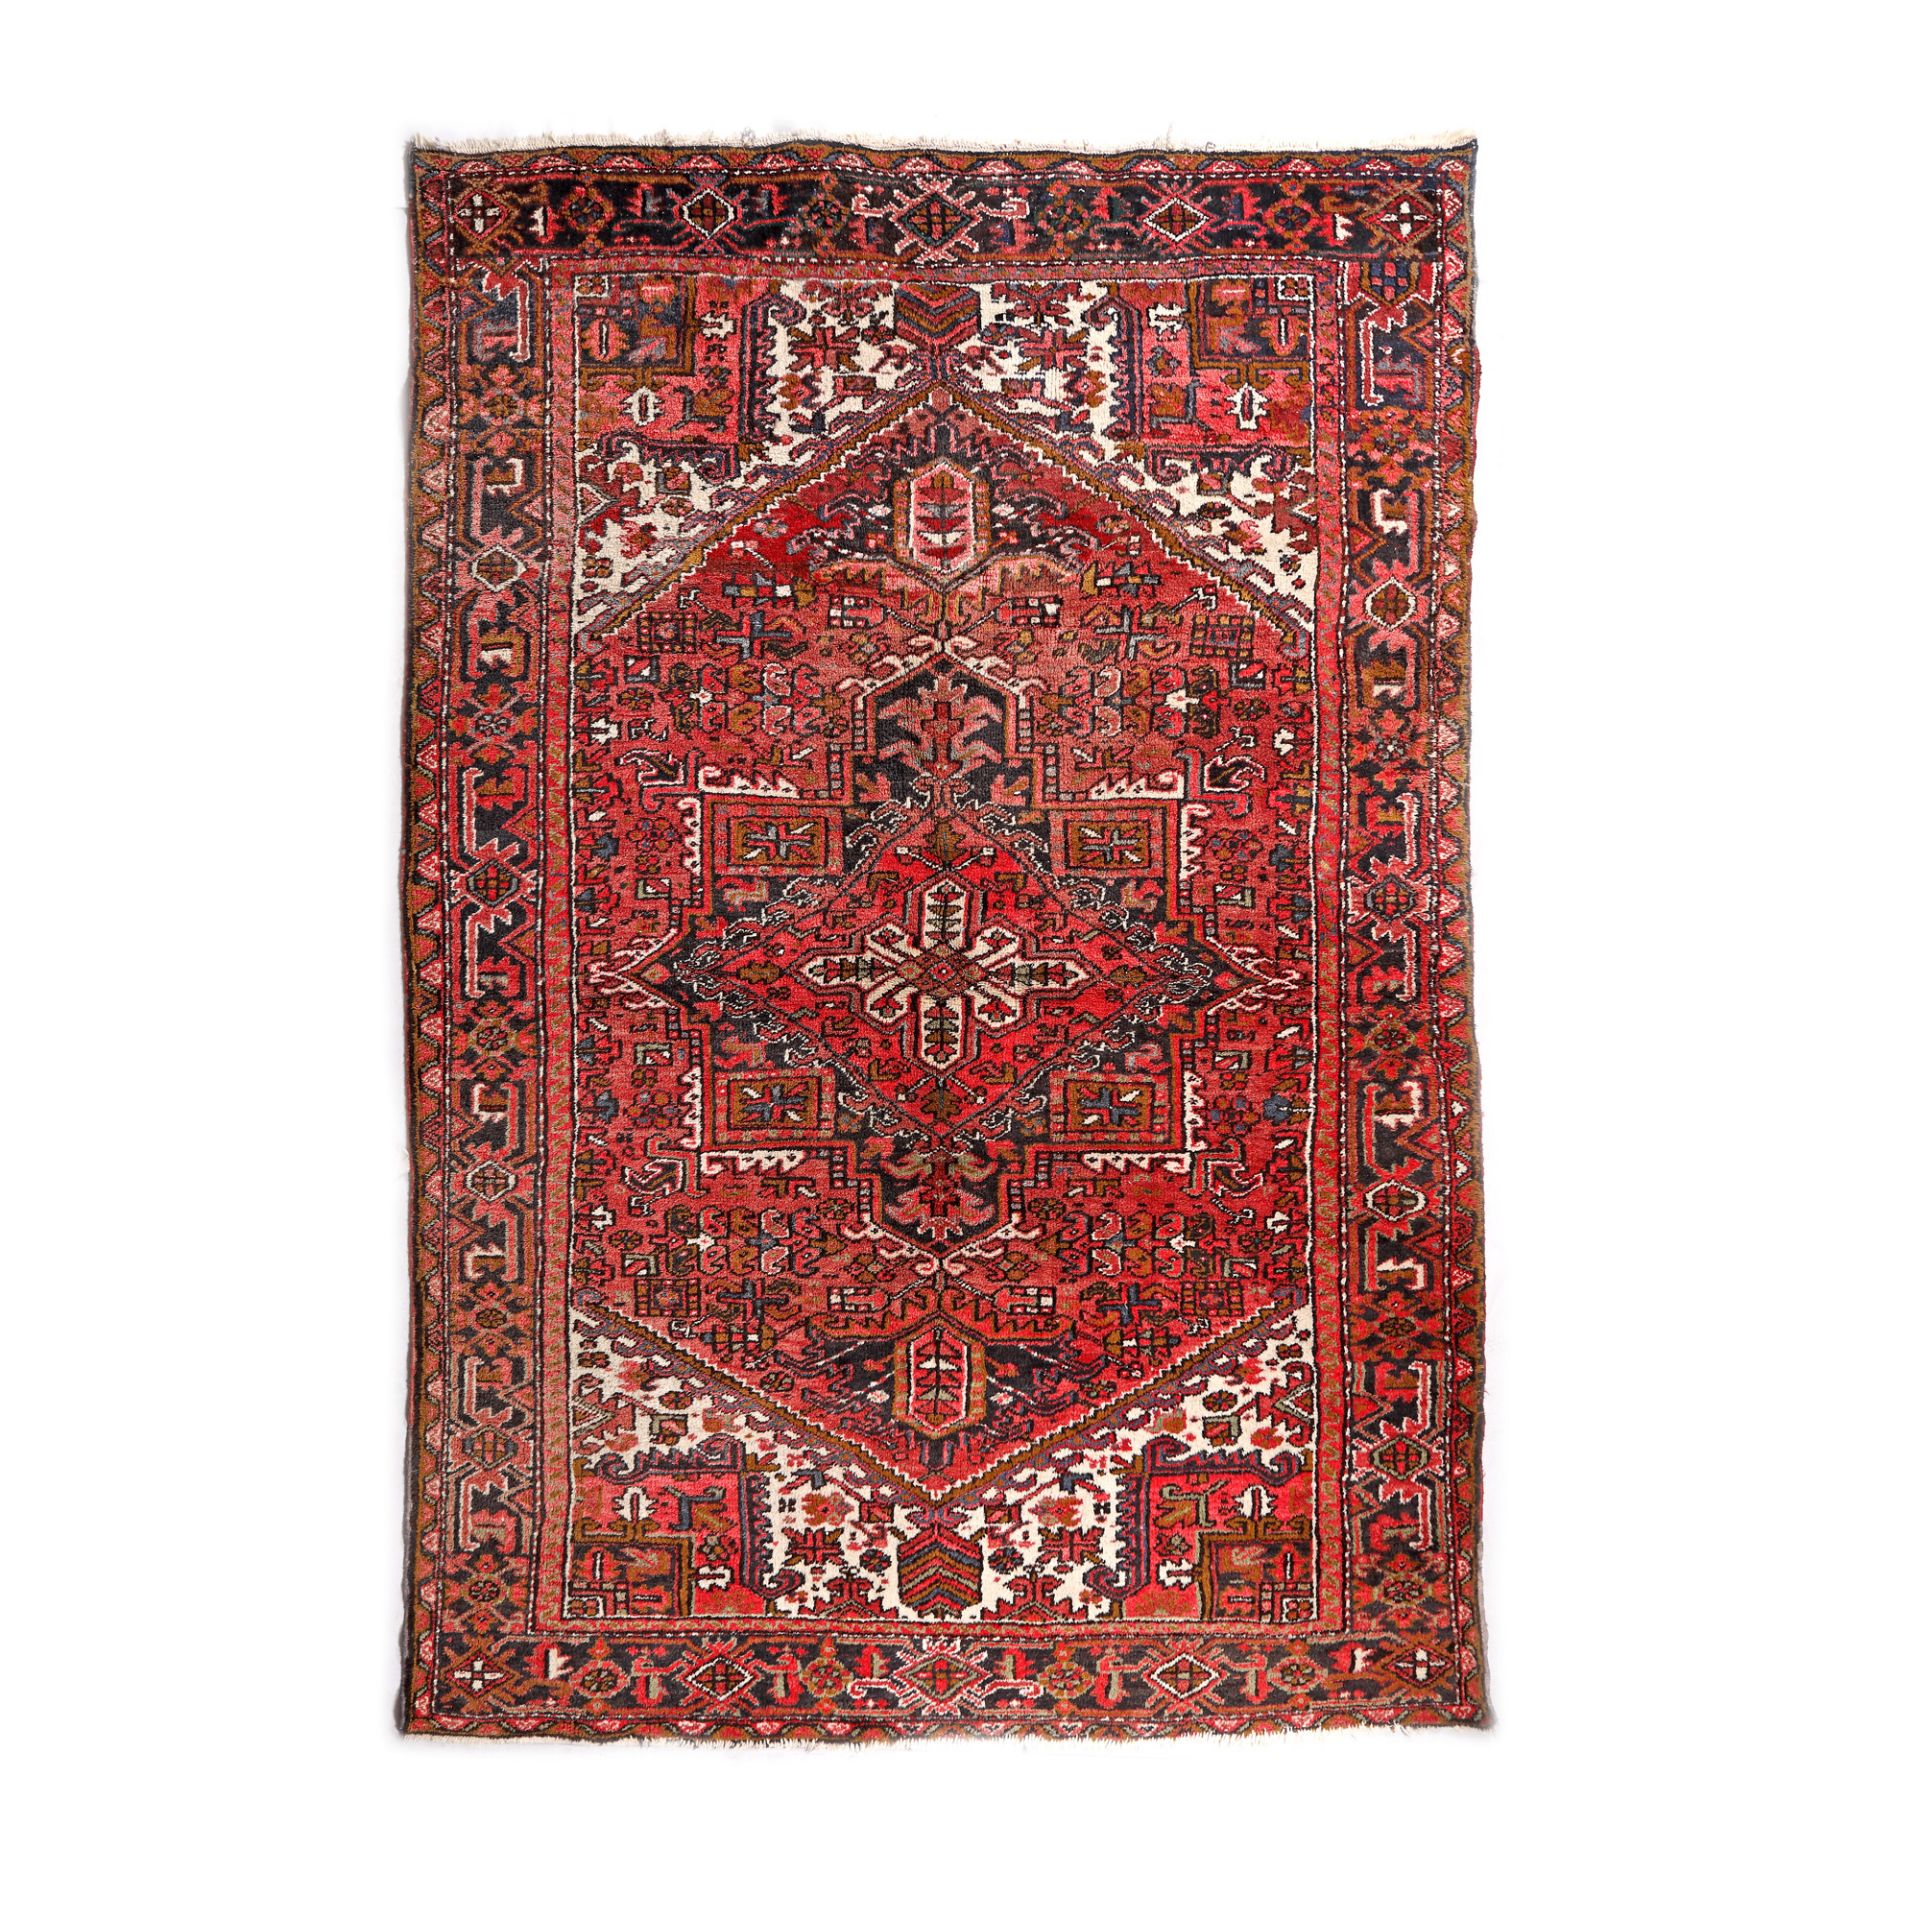 Heriz wool rug, decorated with medallion and acanthus leaves, Iran, mid-20th century